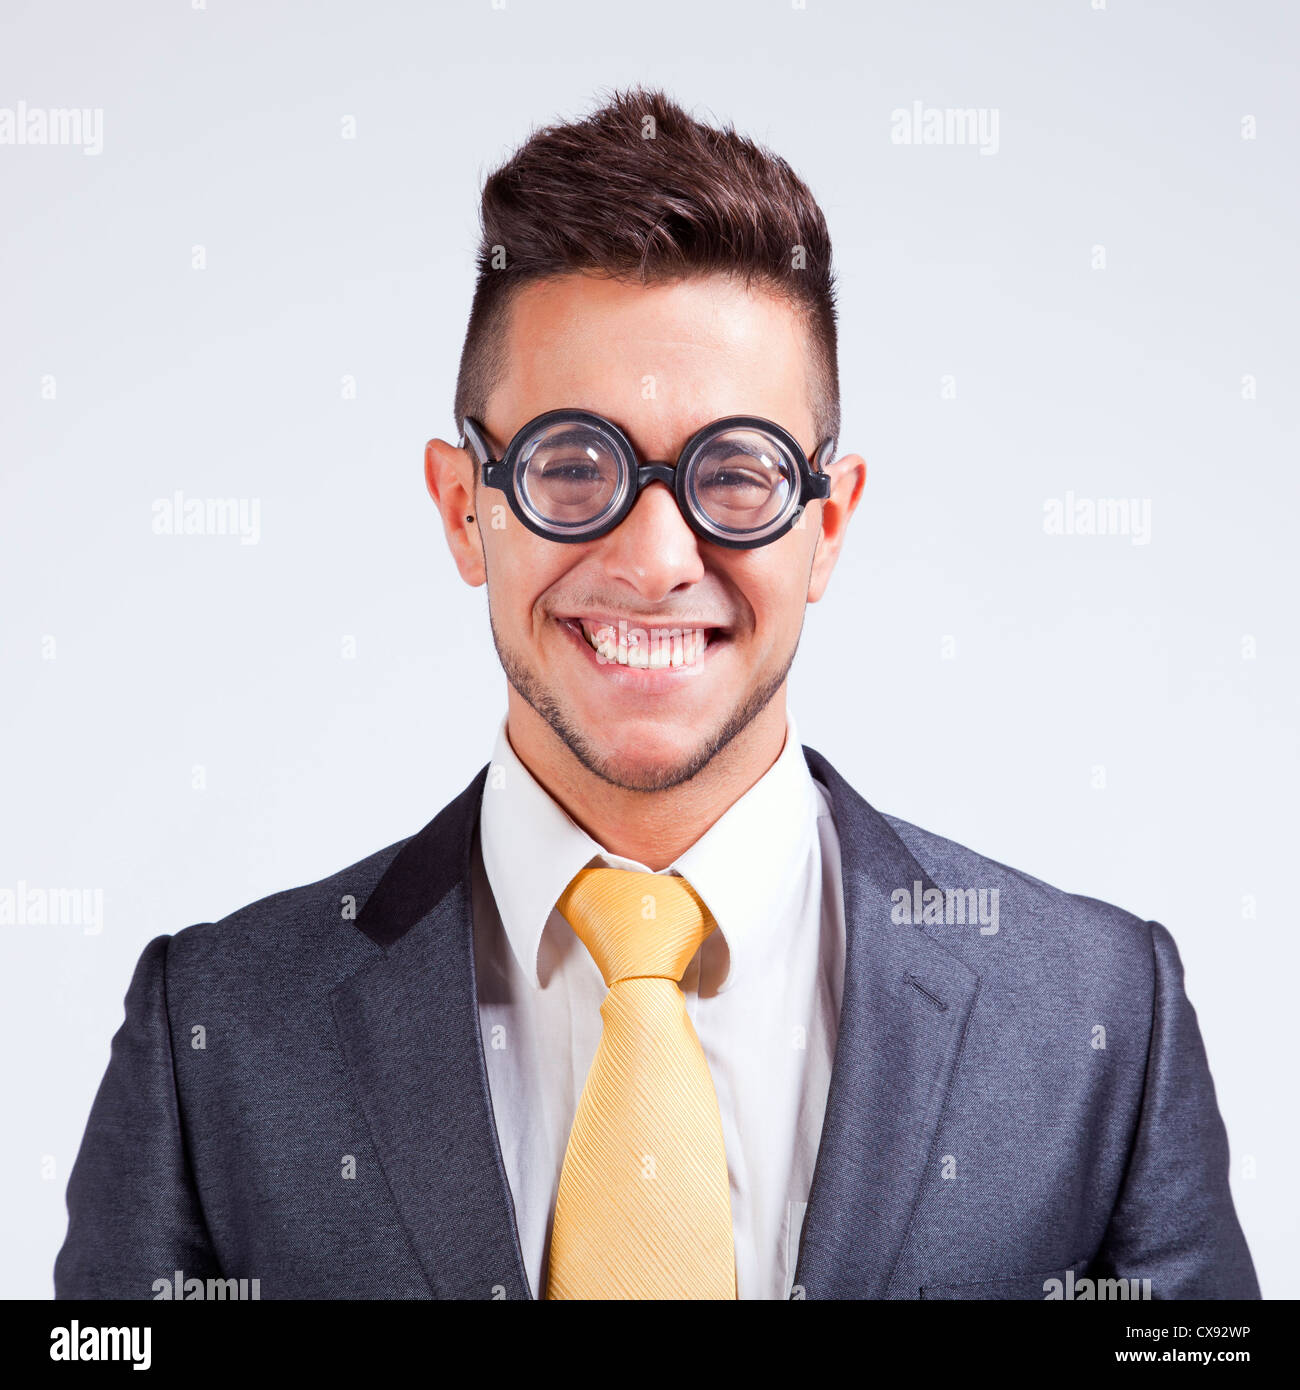 Happy nerd businessman with funny glasses Stock Photo